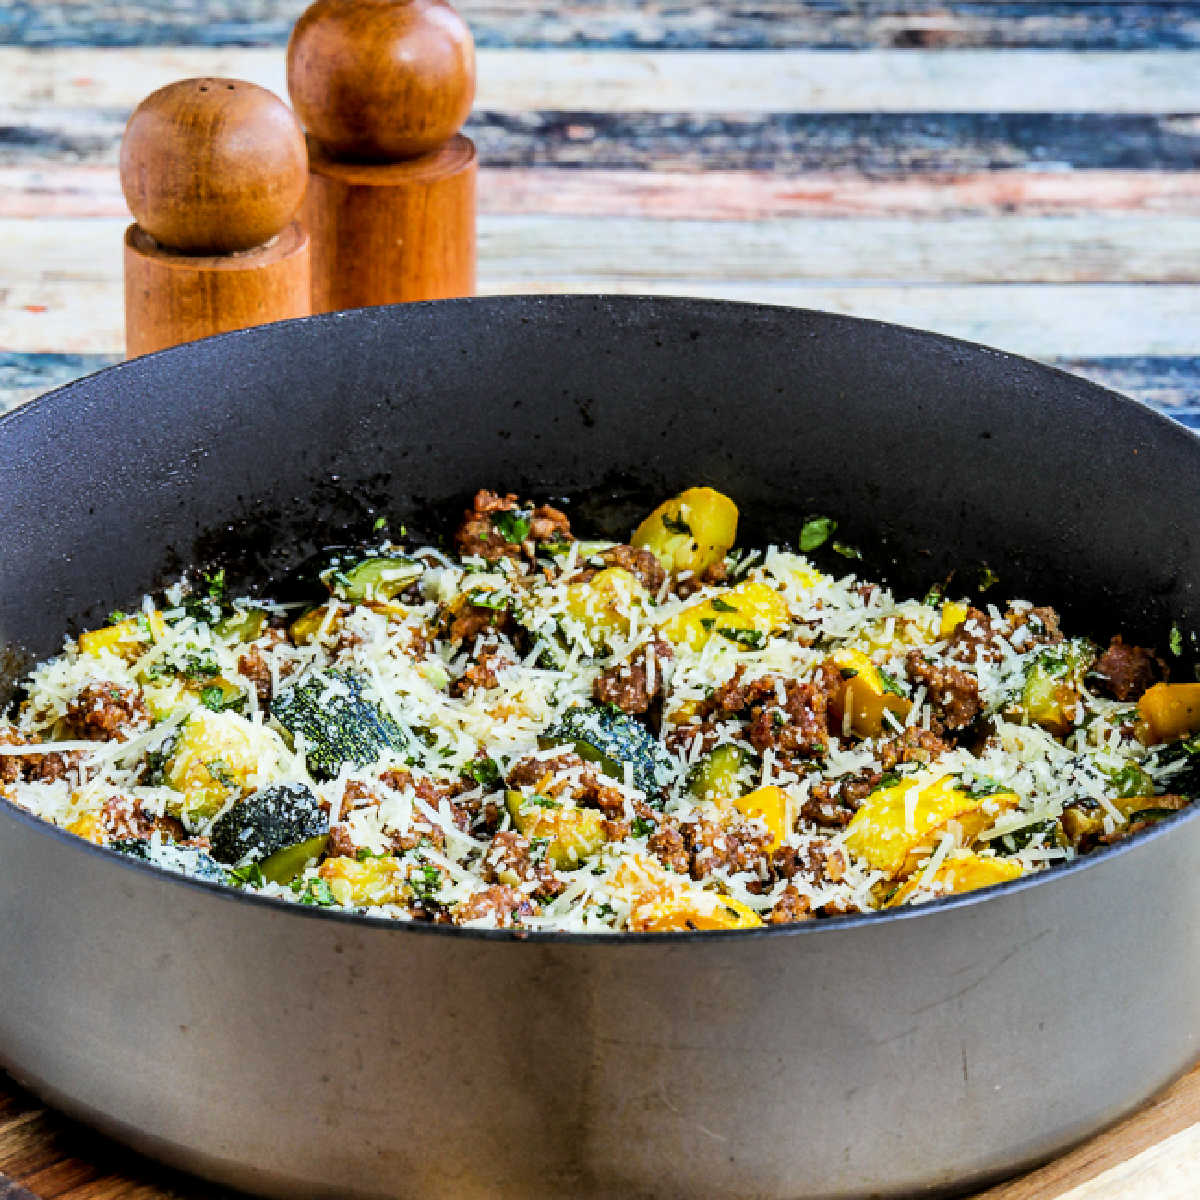 Square image for Italian Sausage and Zucchini Skillet meal shown in skillet.